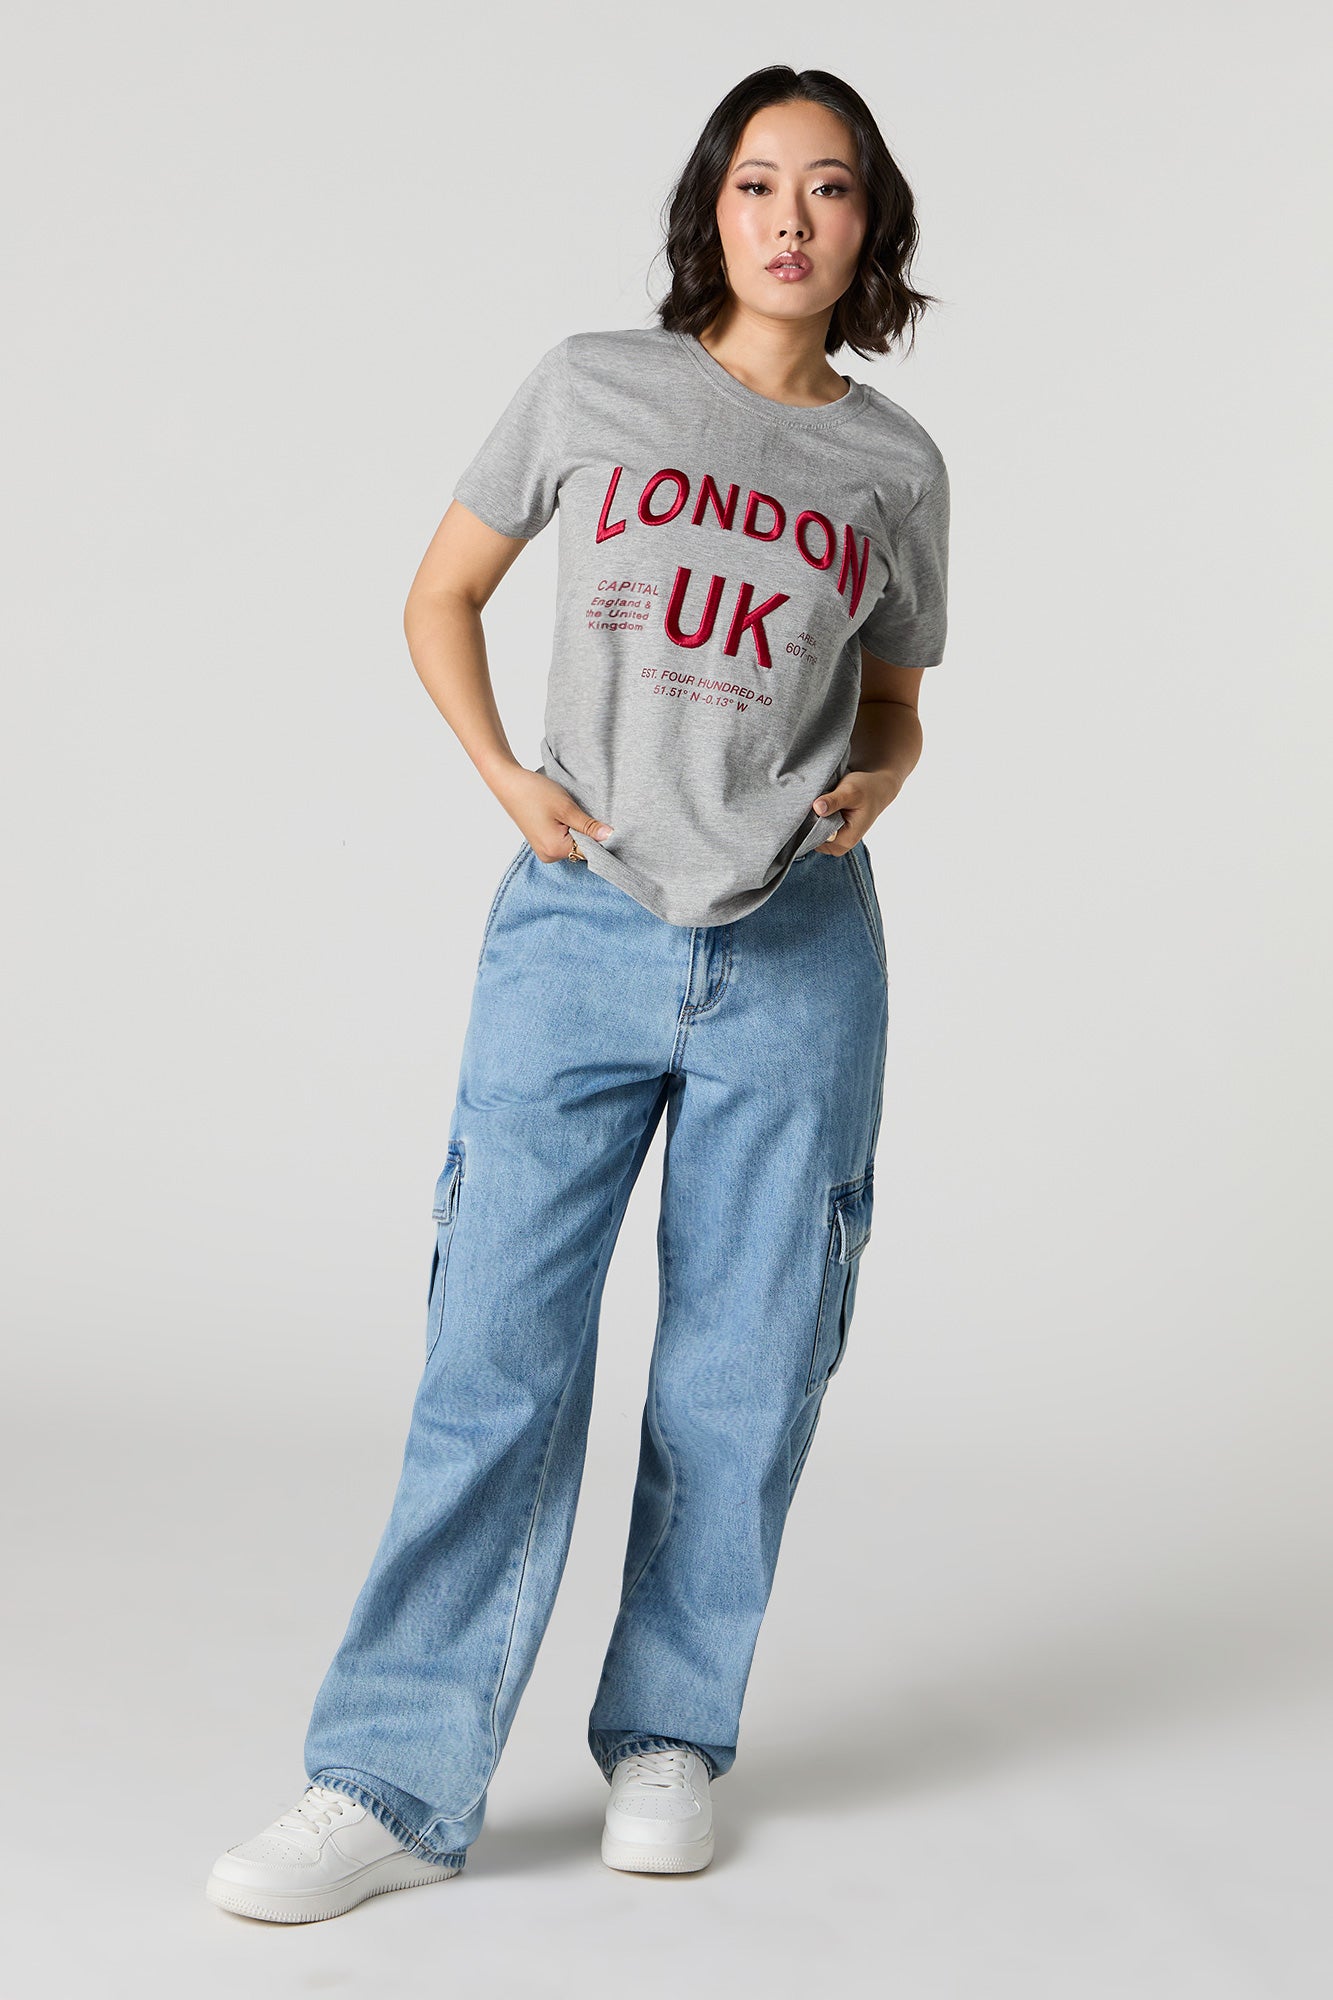 London UK Embroidered T-Shirt